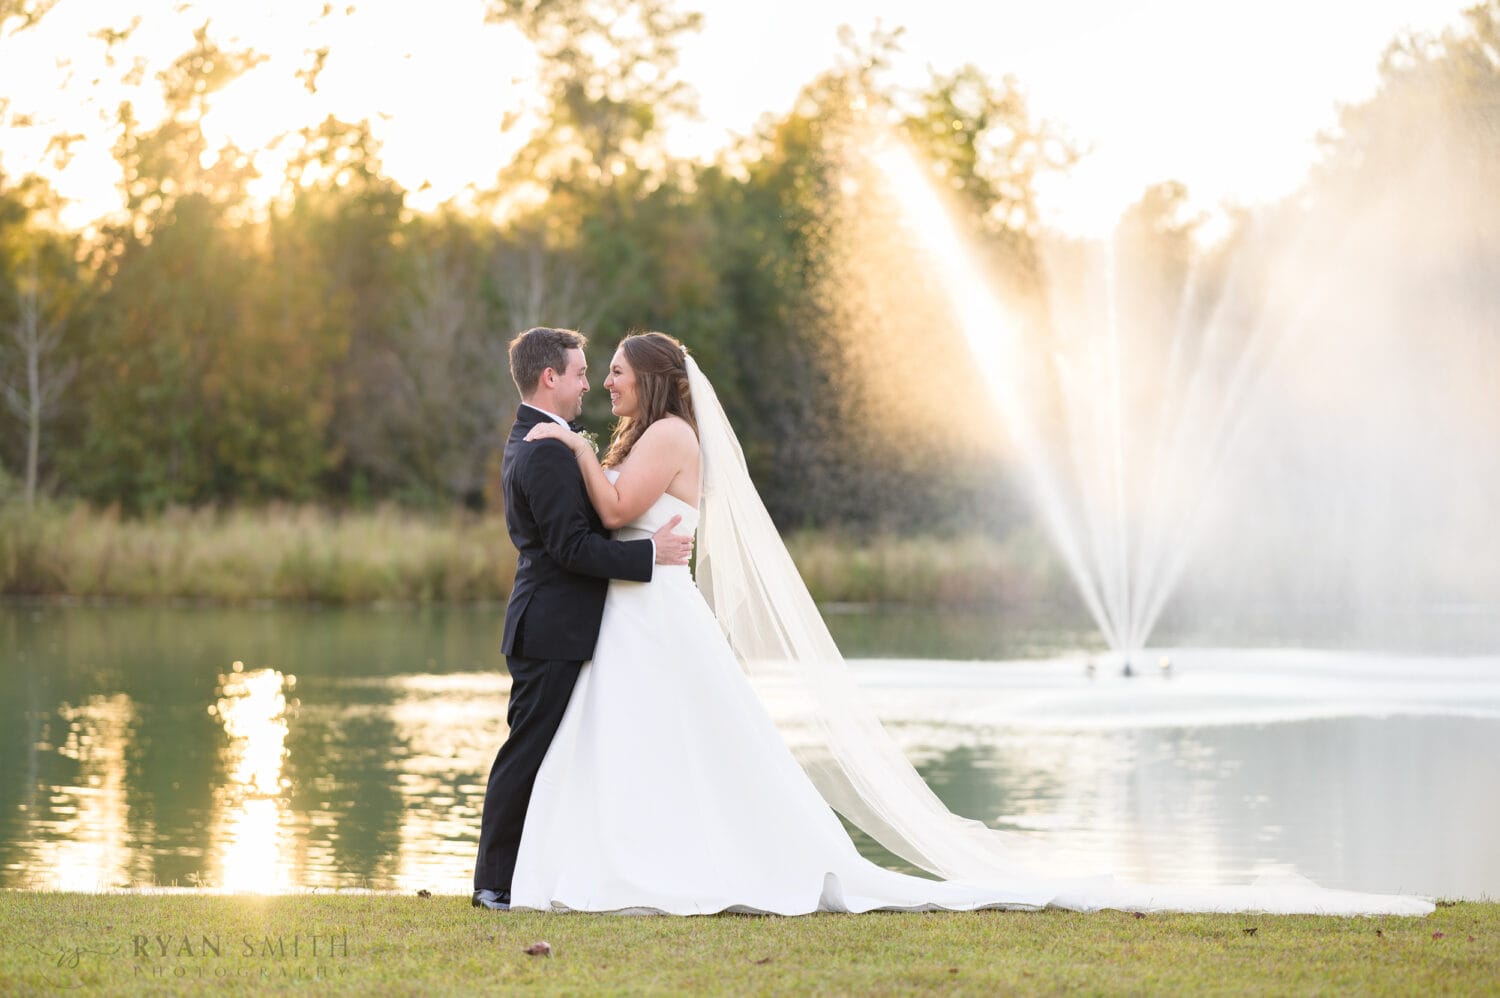 Big smiles with bride and groom in the sunset - The Venue at White Oaks Farm